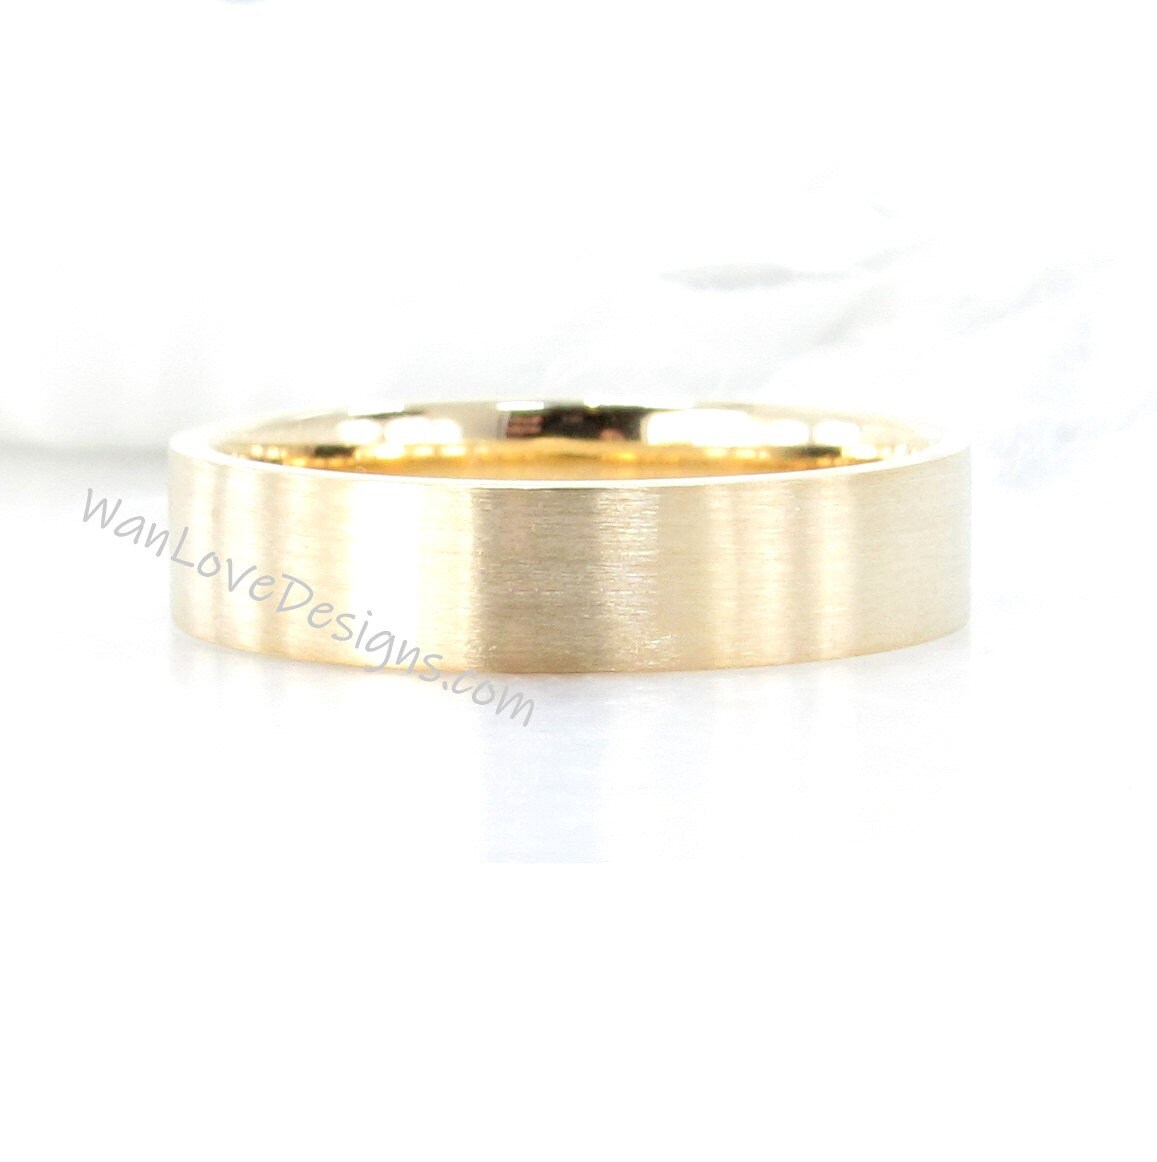 14k 18k Solid Gold Tattoo Engraved Wedding Ring for Men, Gold Mens Wedding Band, Custom Engraved Mens Wedding Ring, Rings for Men, Gift him Wan Love Designs